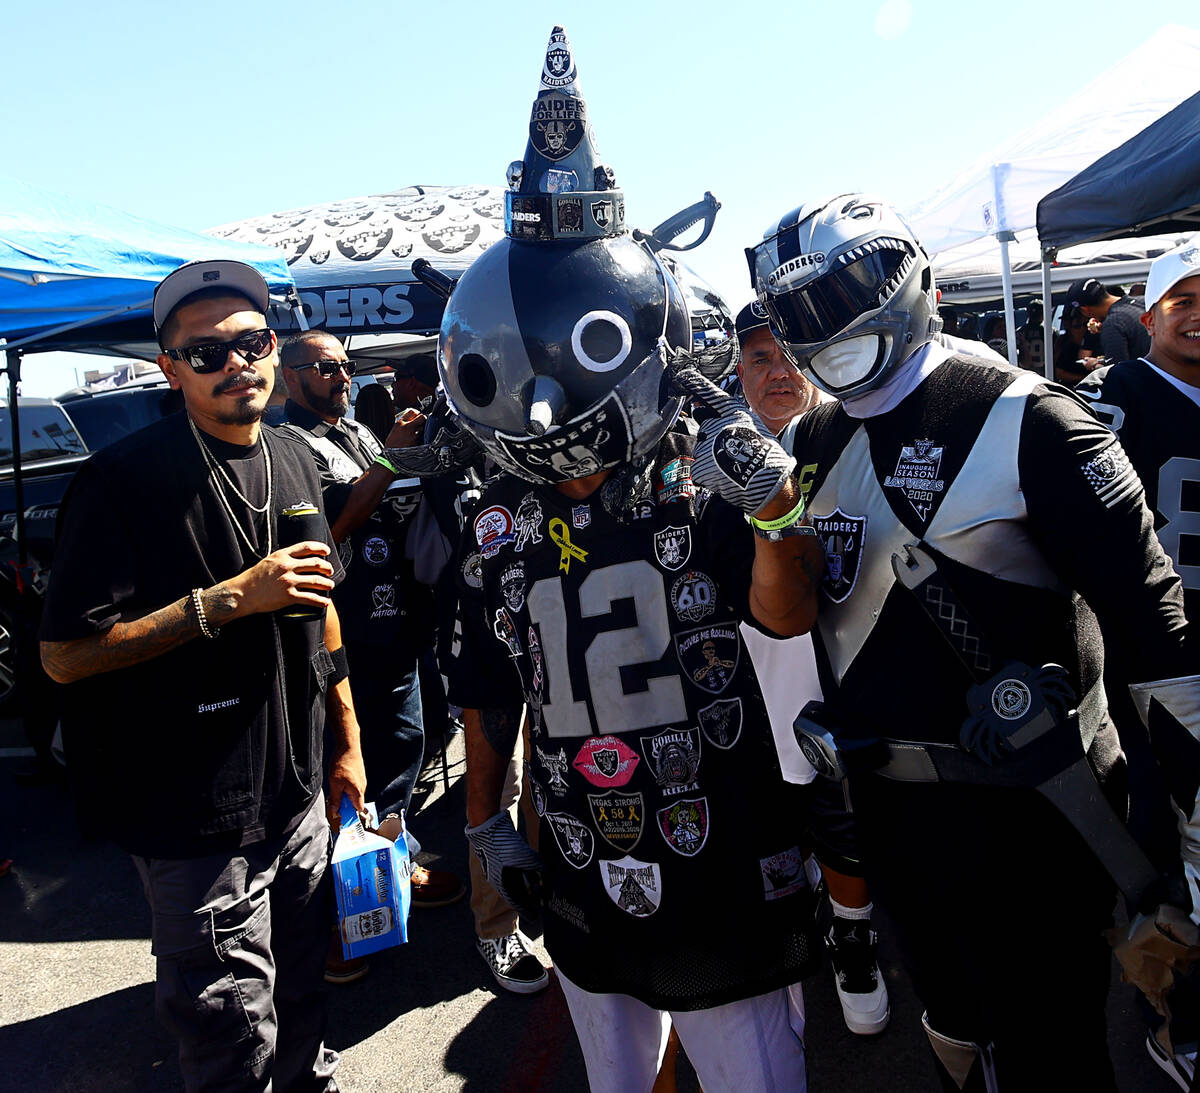 Fans spend time tailgating before an NFL football game between the Raiders and the Baltimore Ra ...